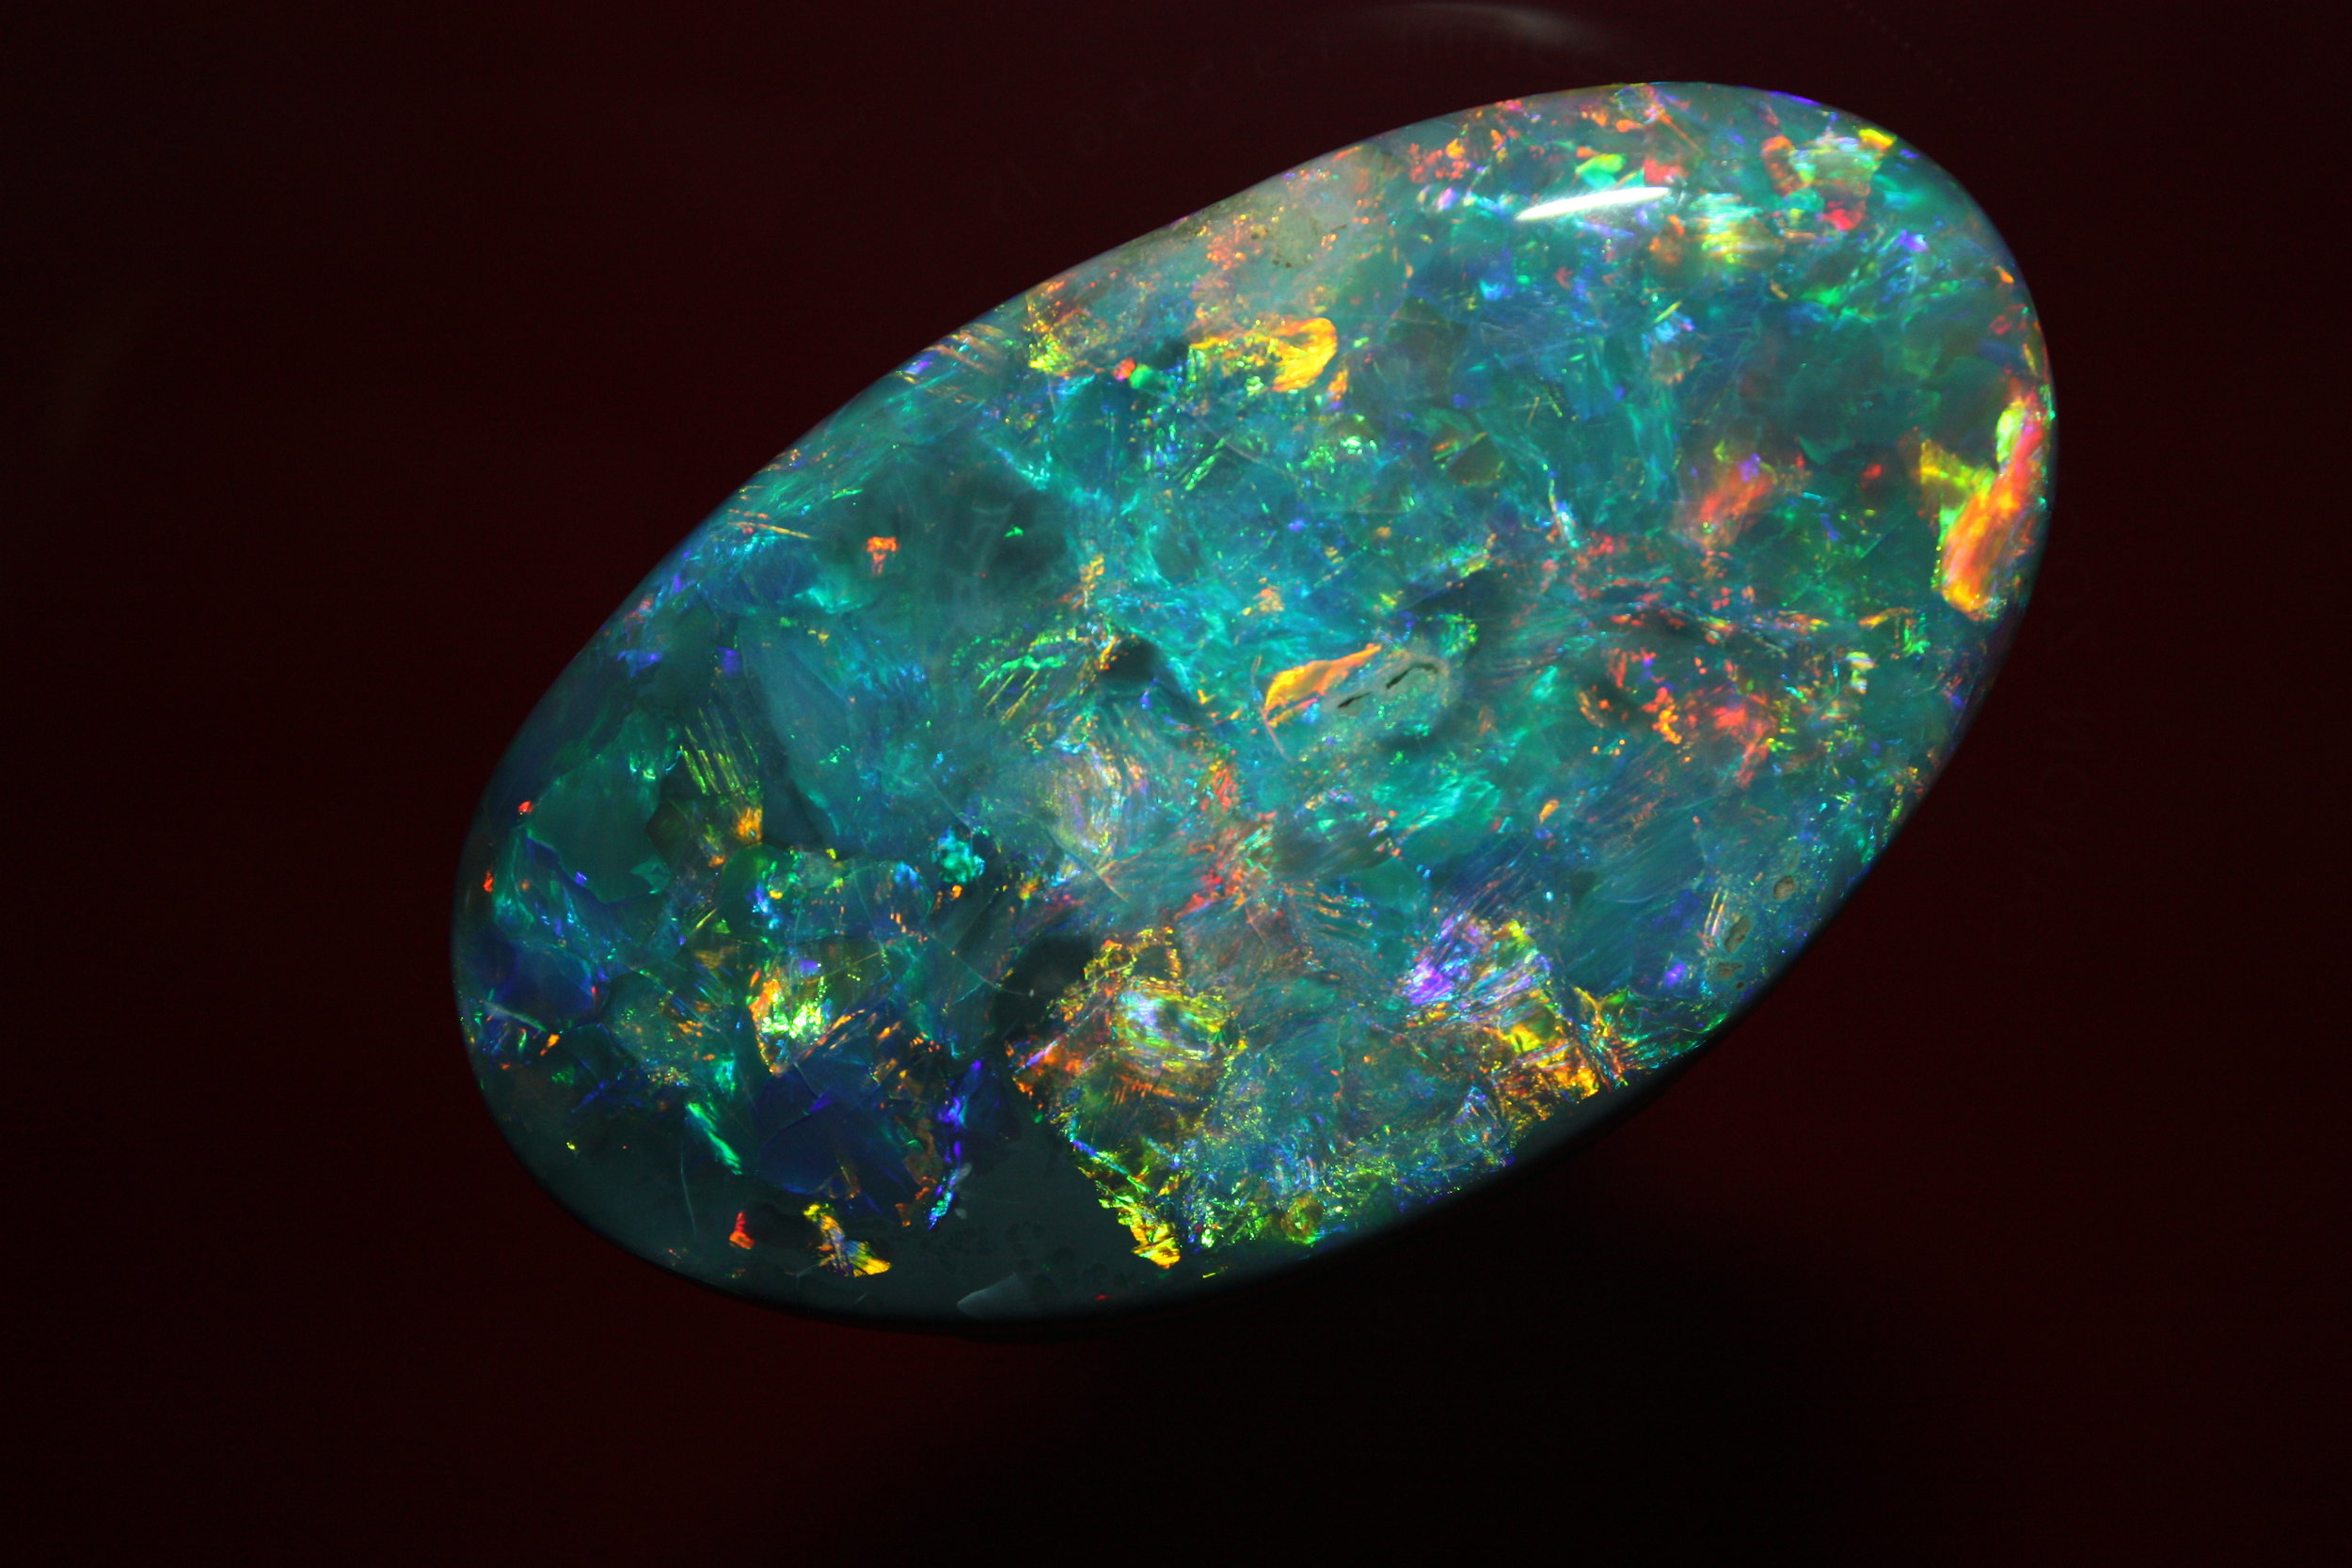 Rare Exclusive Pattern Black Opal Gemstone Rainbow Fire Opal Size 16.2X11.5X5.2 MM Top Quality Opal Only At My Shop.